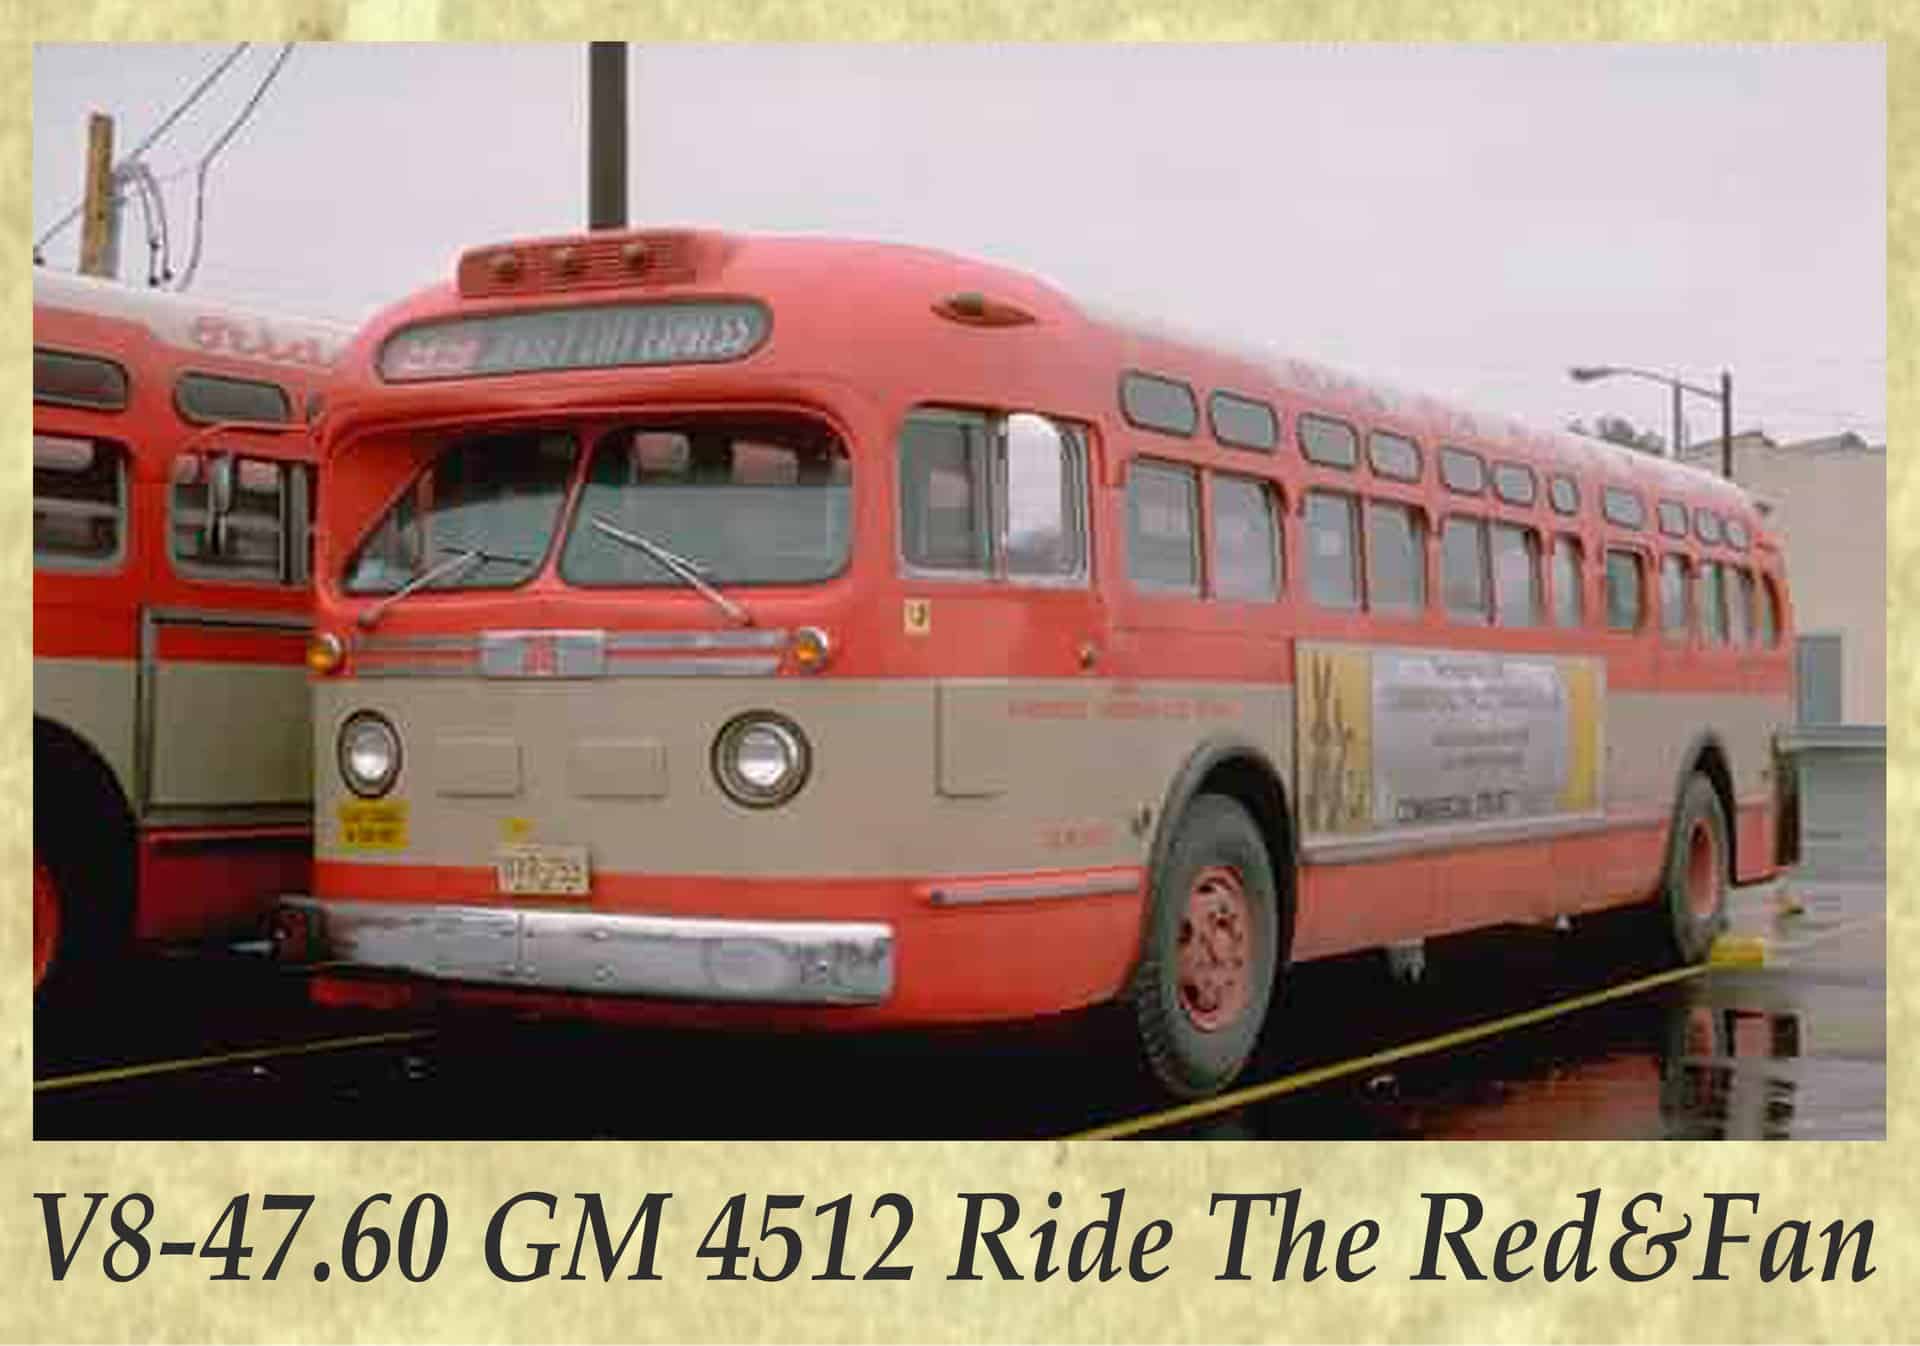 V8-47.60 GM 4512 Ride The Red&Fan